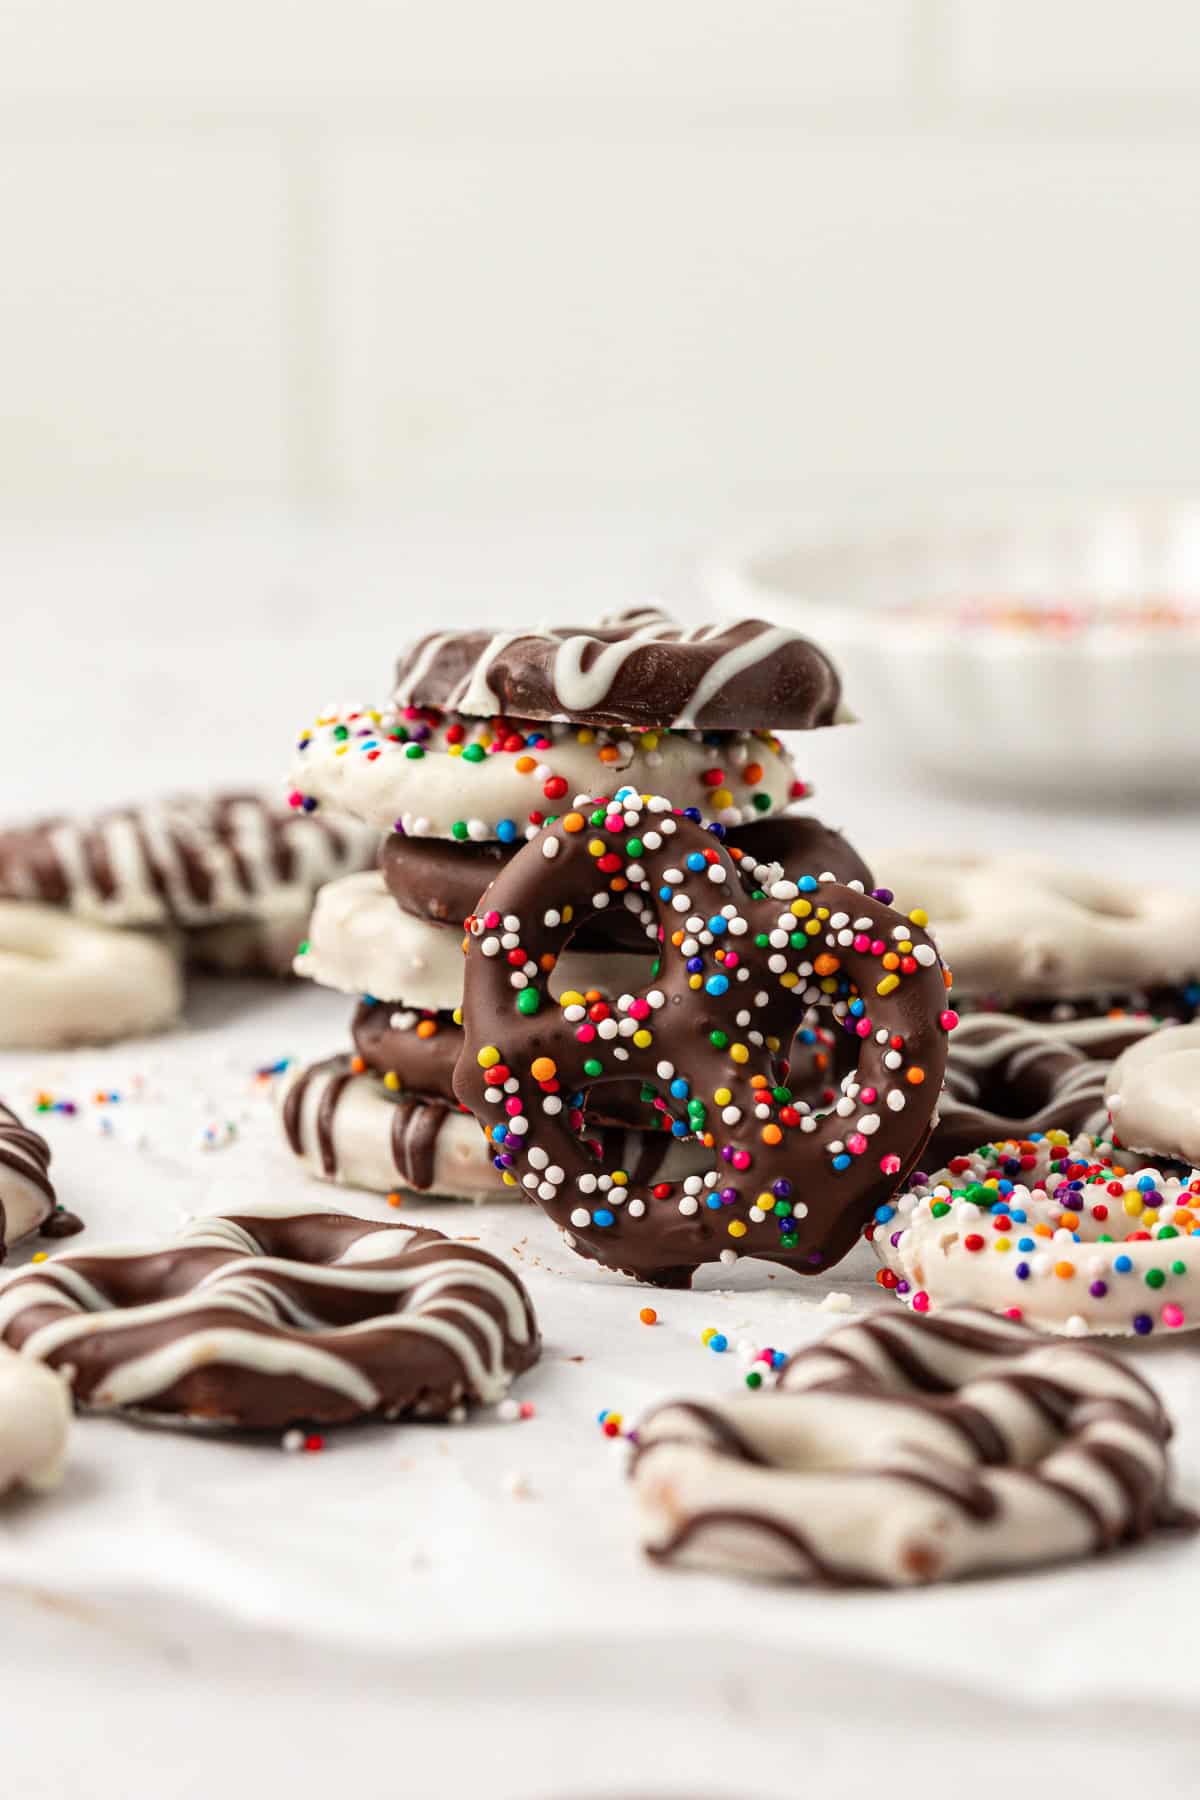 an assortment of chocolate covered pretzels stacked and scattered around including chocolate with white chocolate drizzle, white chocolate with chocolate drizzle, and both chocolate and white chocolate coated in rainbow sprinkles